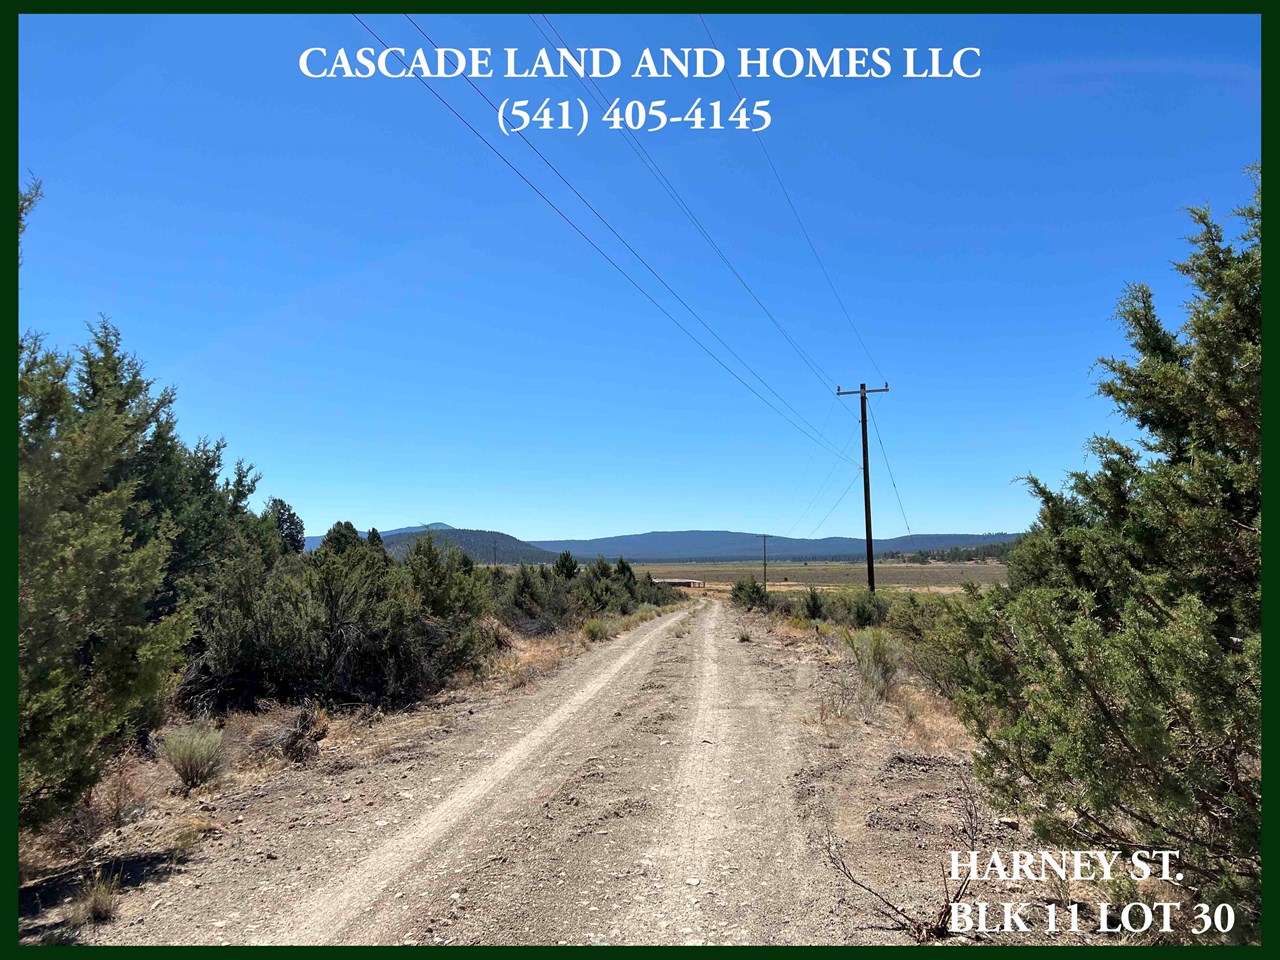 the property is right off of the paved road, just a few hundred feet of well maintained, harney st., which is dirt and compacted gravel, before you reach the property. we had no trouble at all accessing the property.